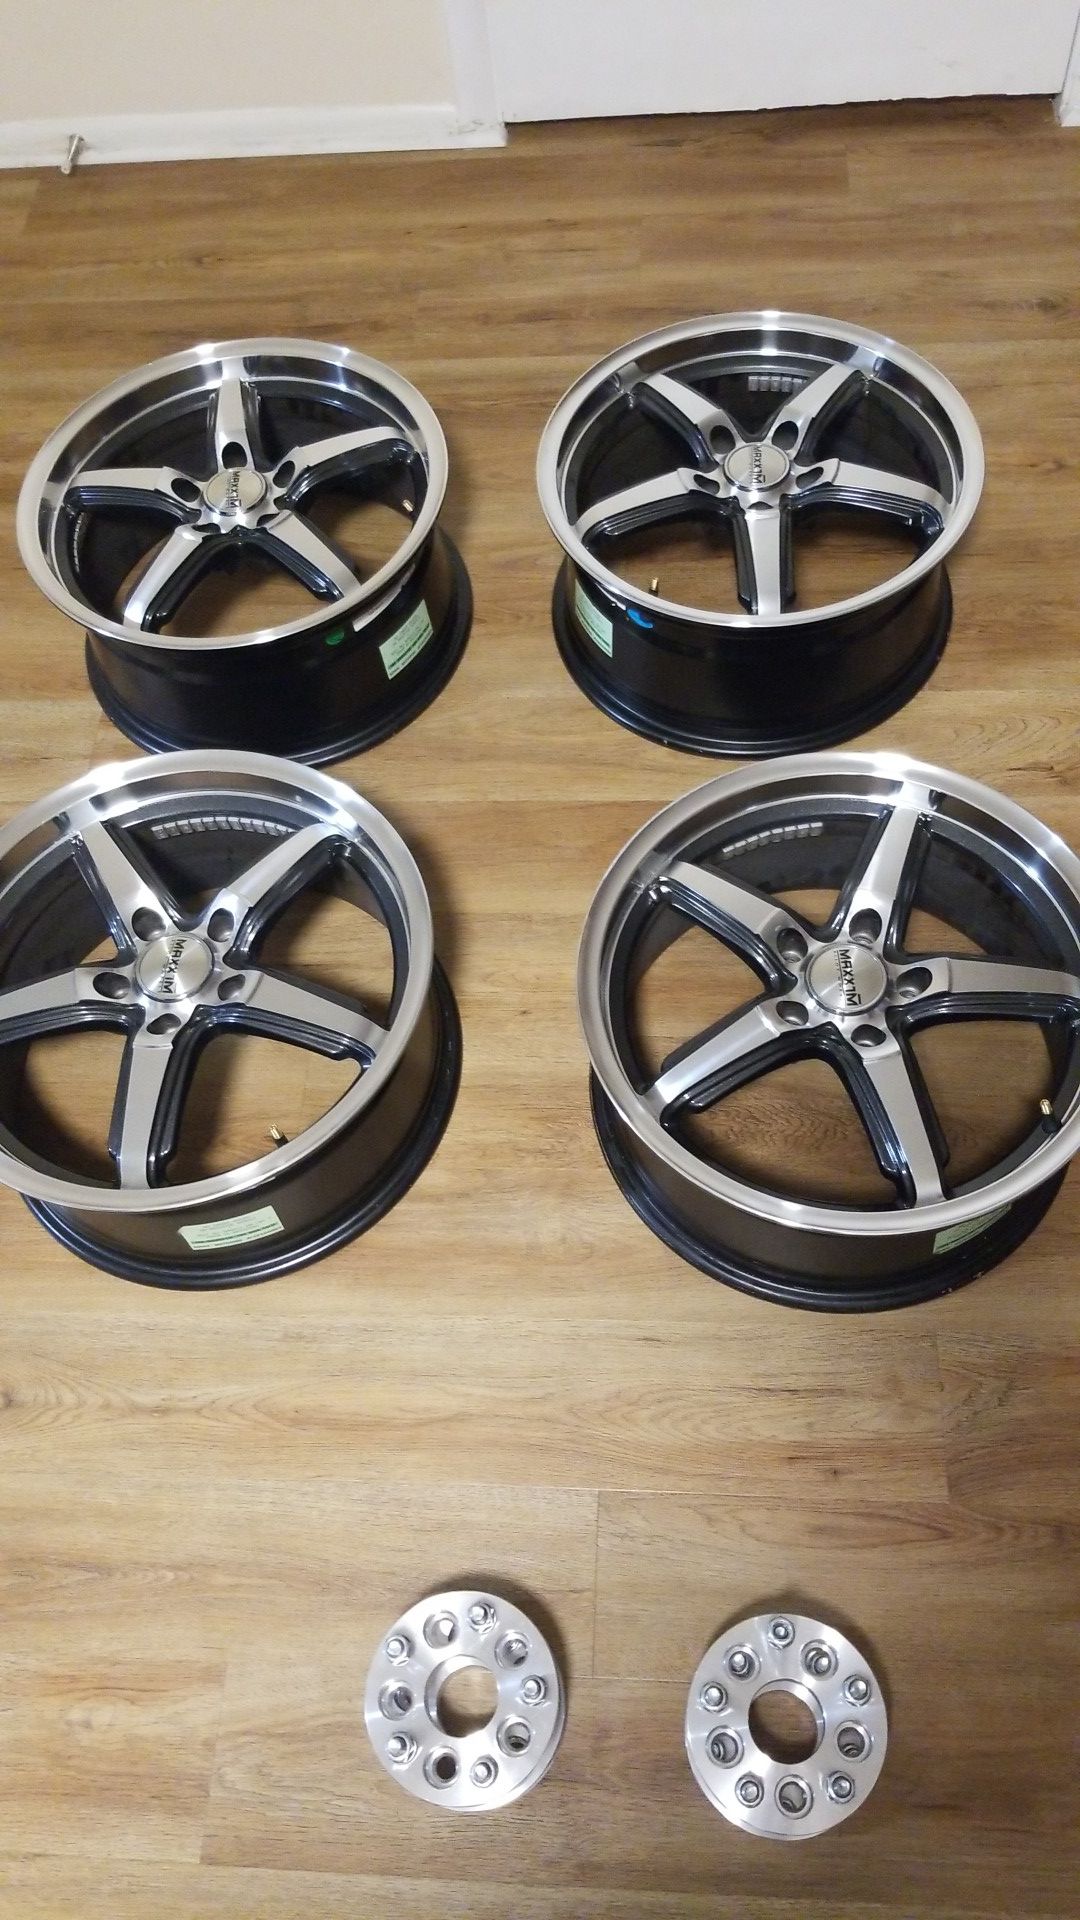 (17")Rims and adapters .. 5 x 112 with 5x100 to 5x112.. 1" adapters